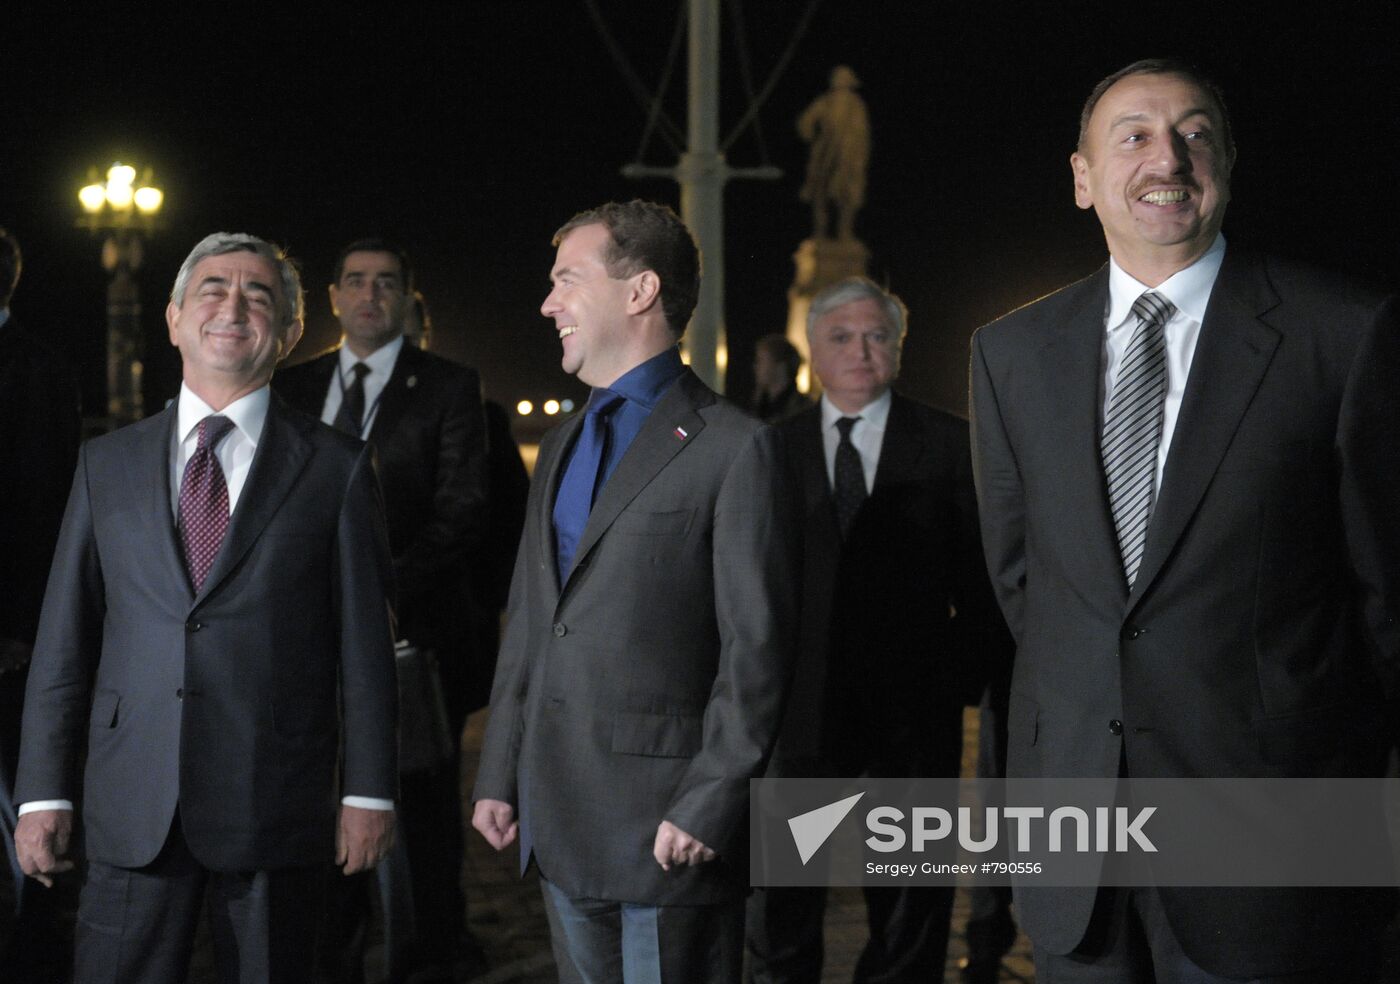 Trilateral meeting of Presidents of Russia, Azerbaijan and Armen